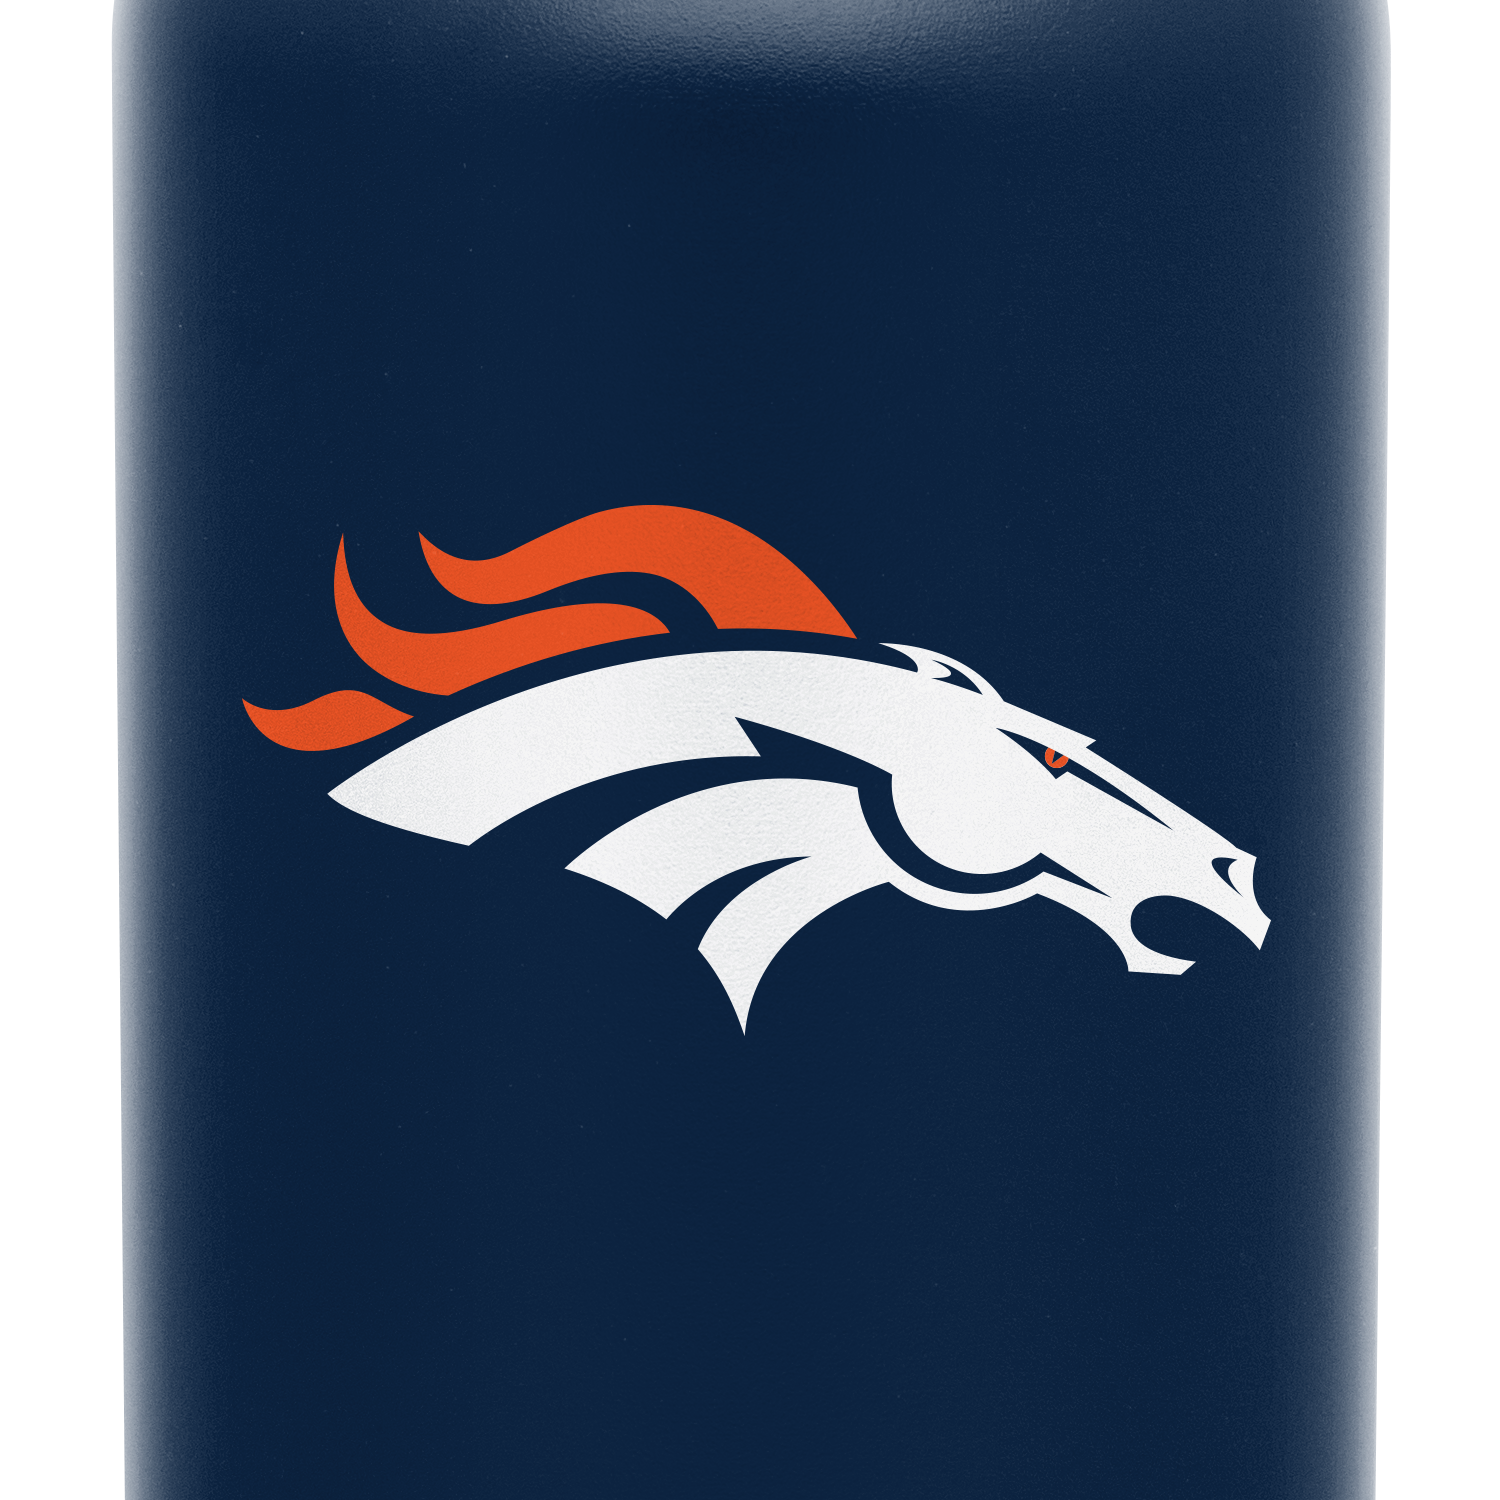 Simple Modern Officially Licensed NFL Denver Broncos Water Bottle with  Straw Lid